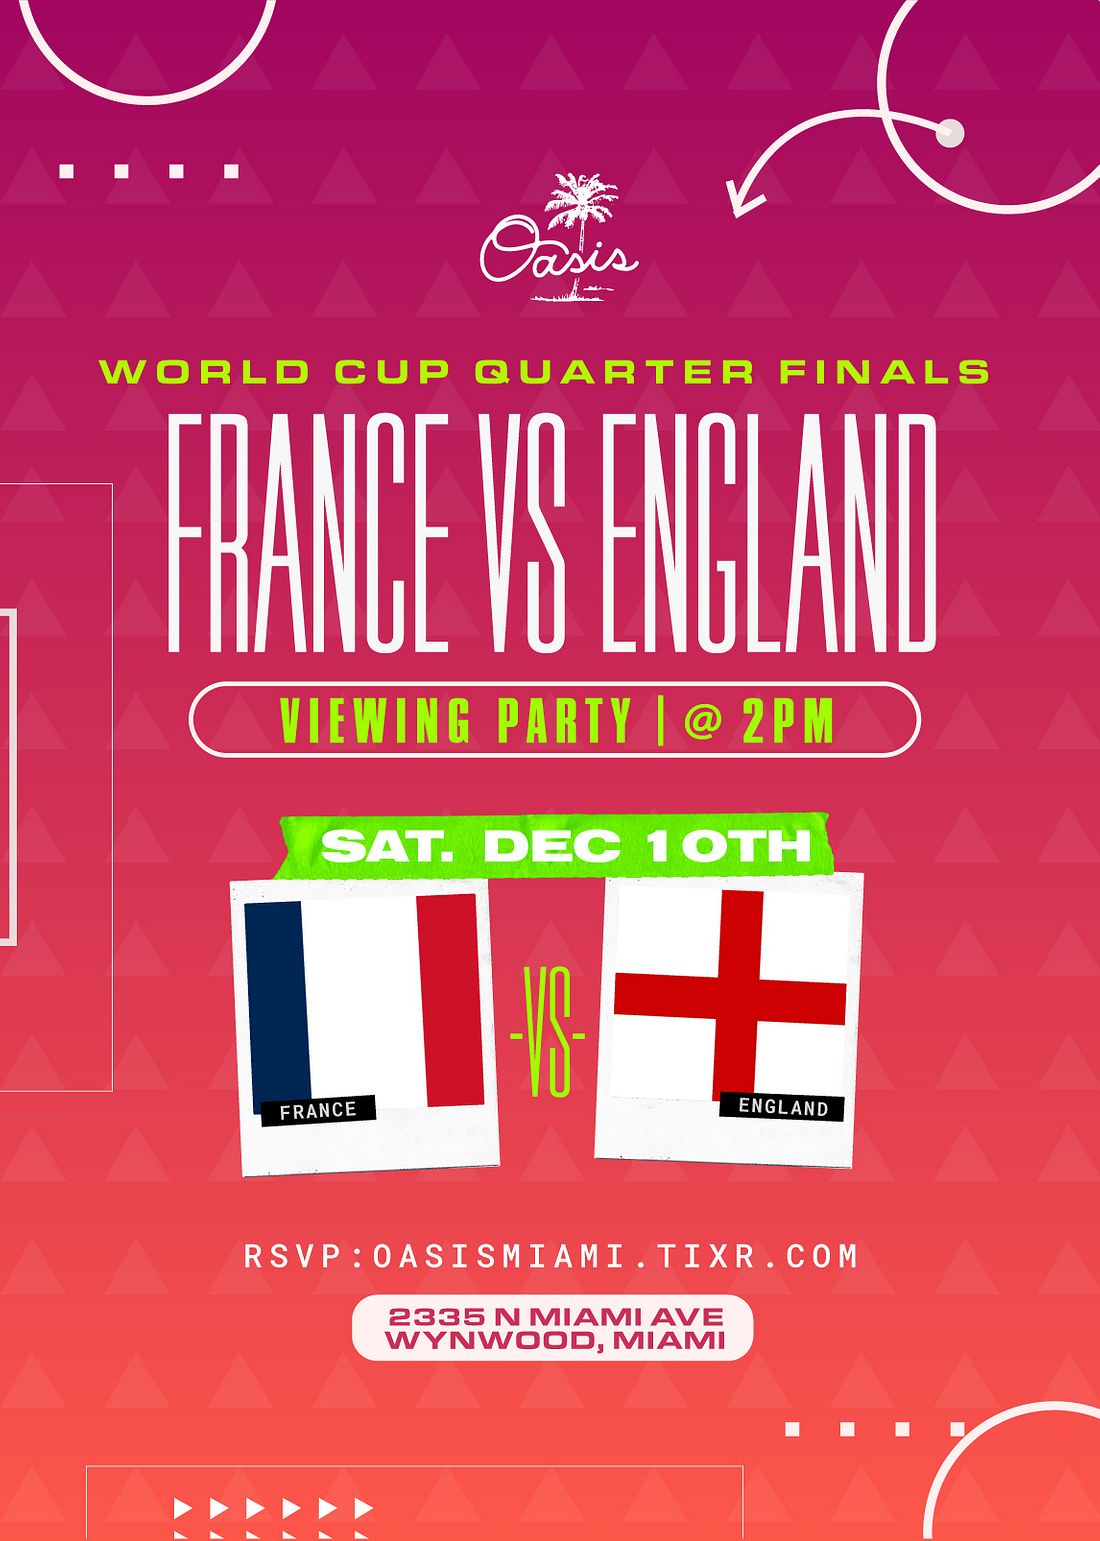 WORLD CUP FRANCE vs ENGLAND Tickets at Oasis Wynwood in Miami by Oasis